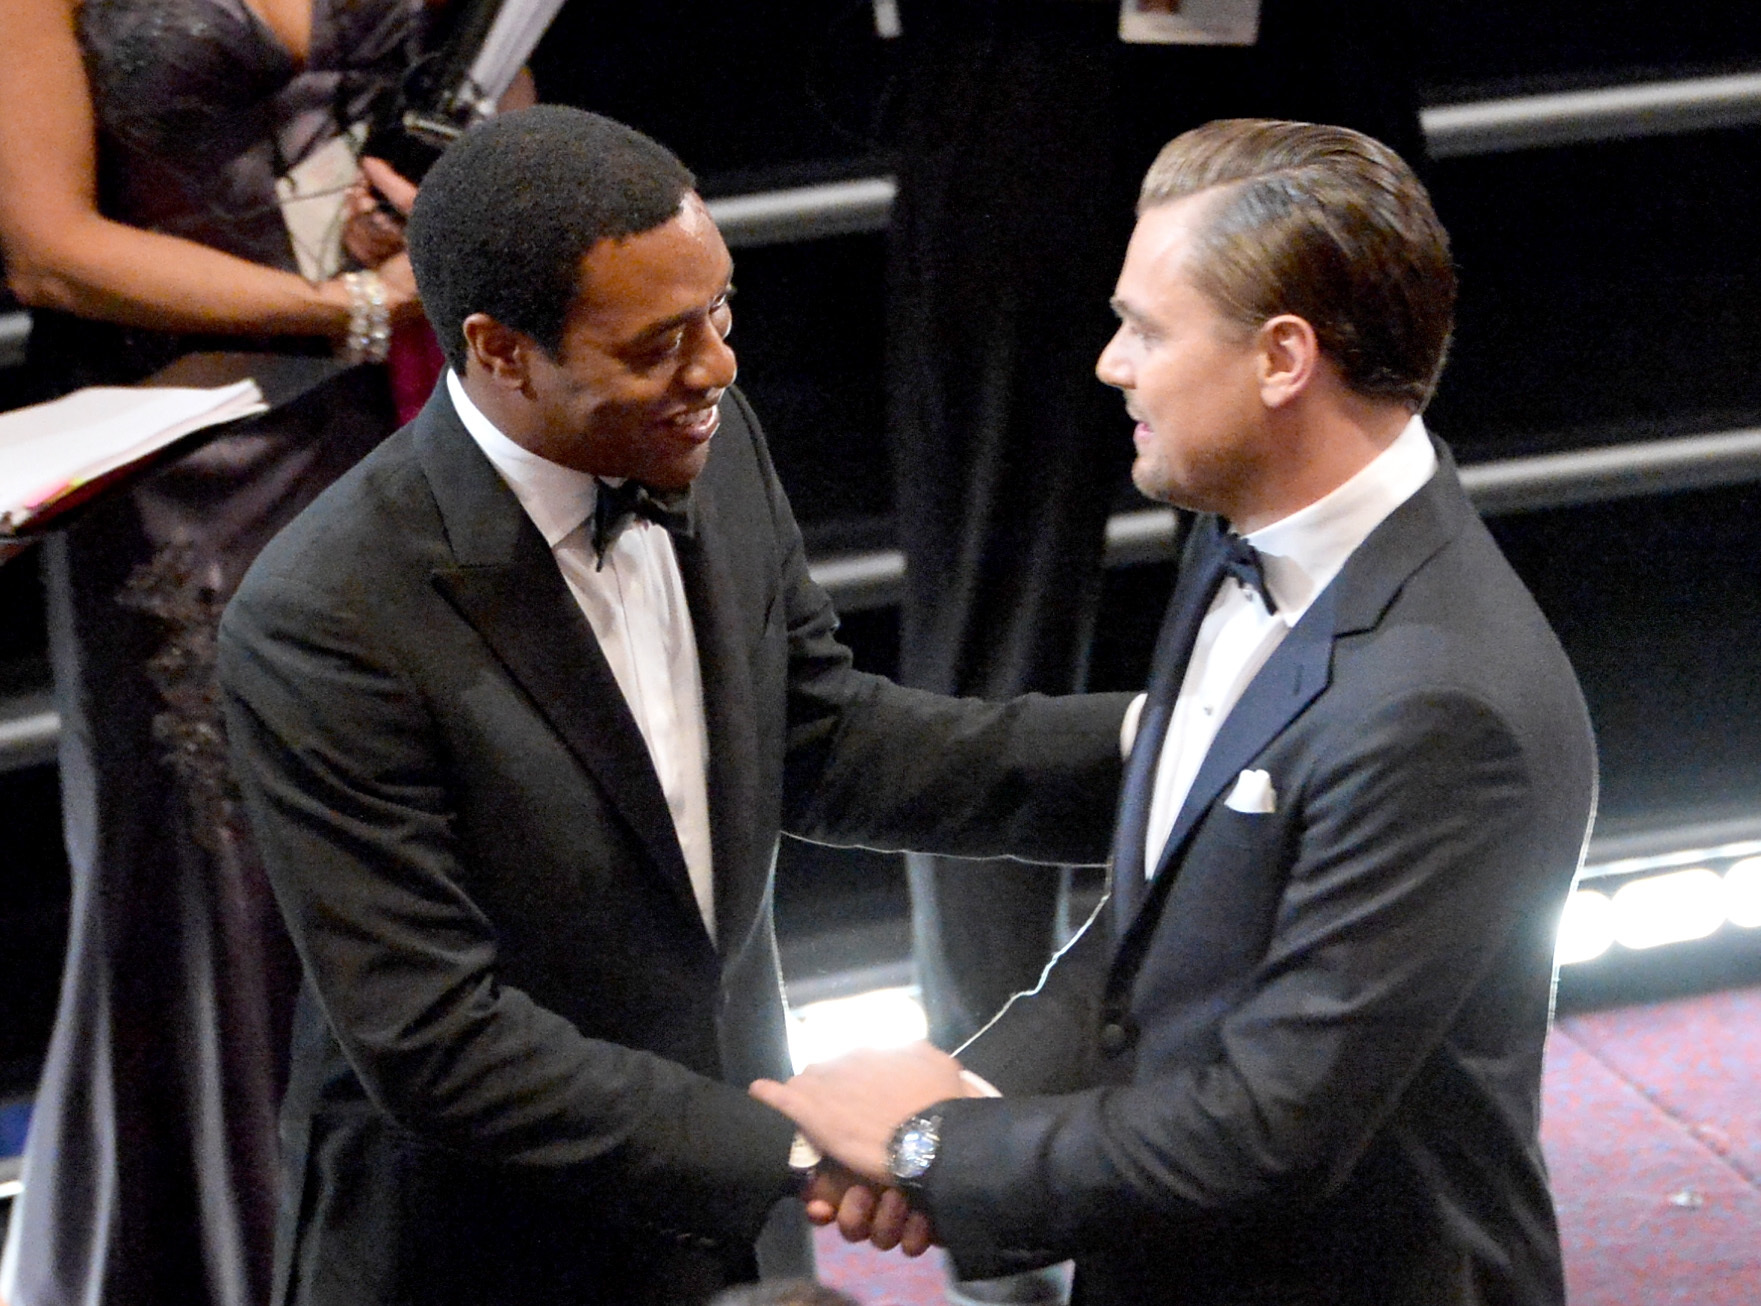 Leonardo DiCaprio and Chiwetel Ejiofor at event of The Oscars (2014)